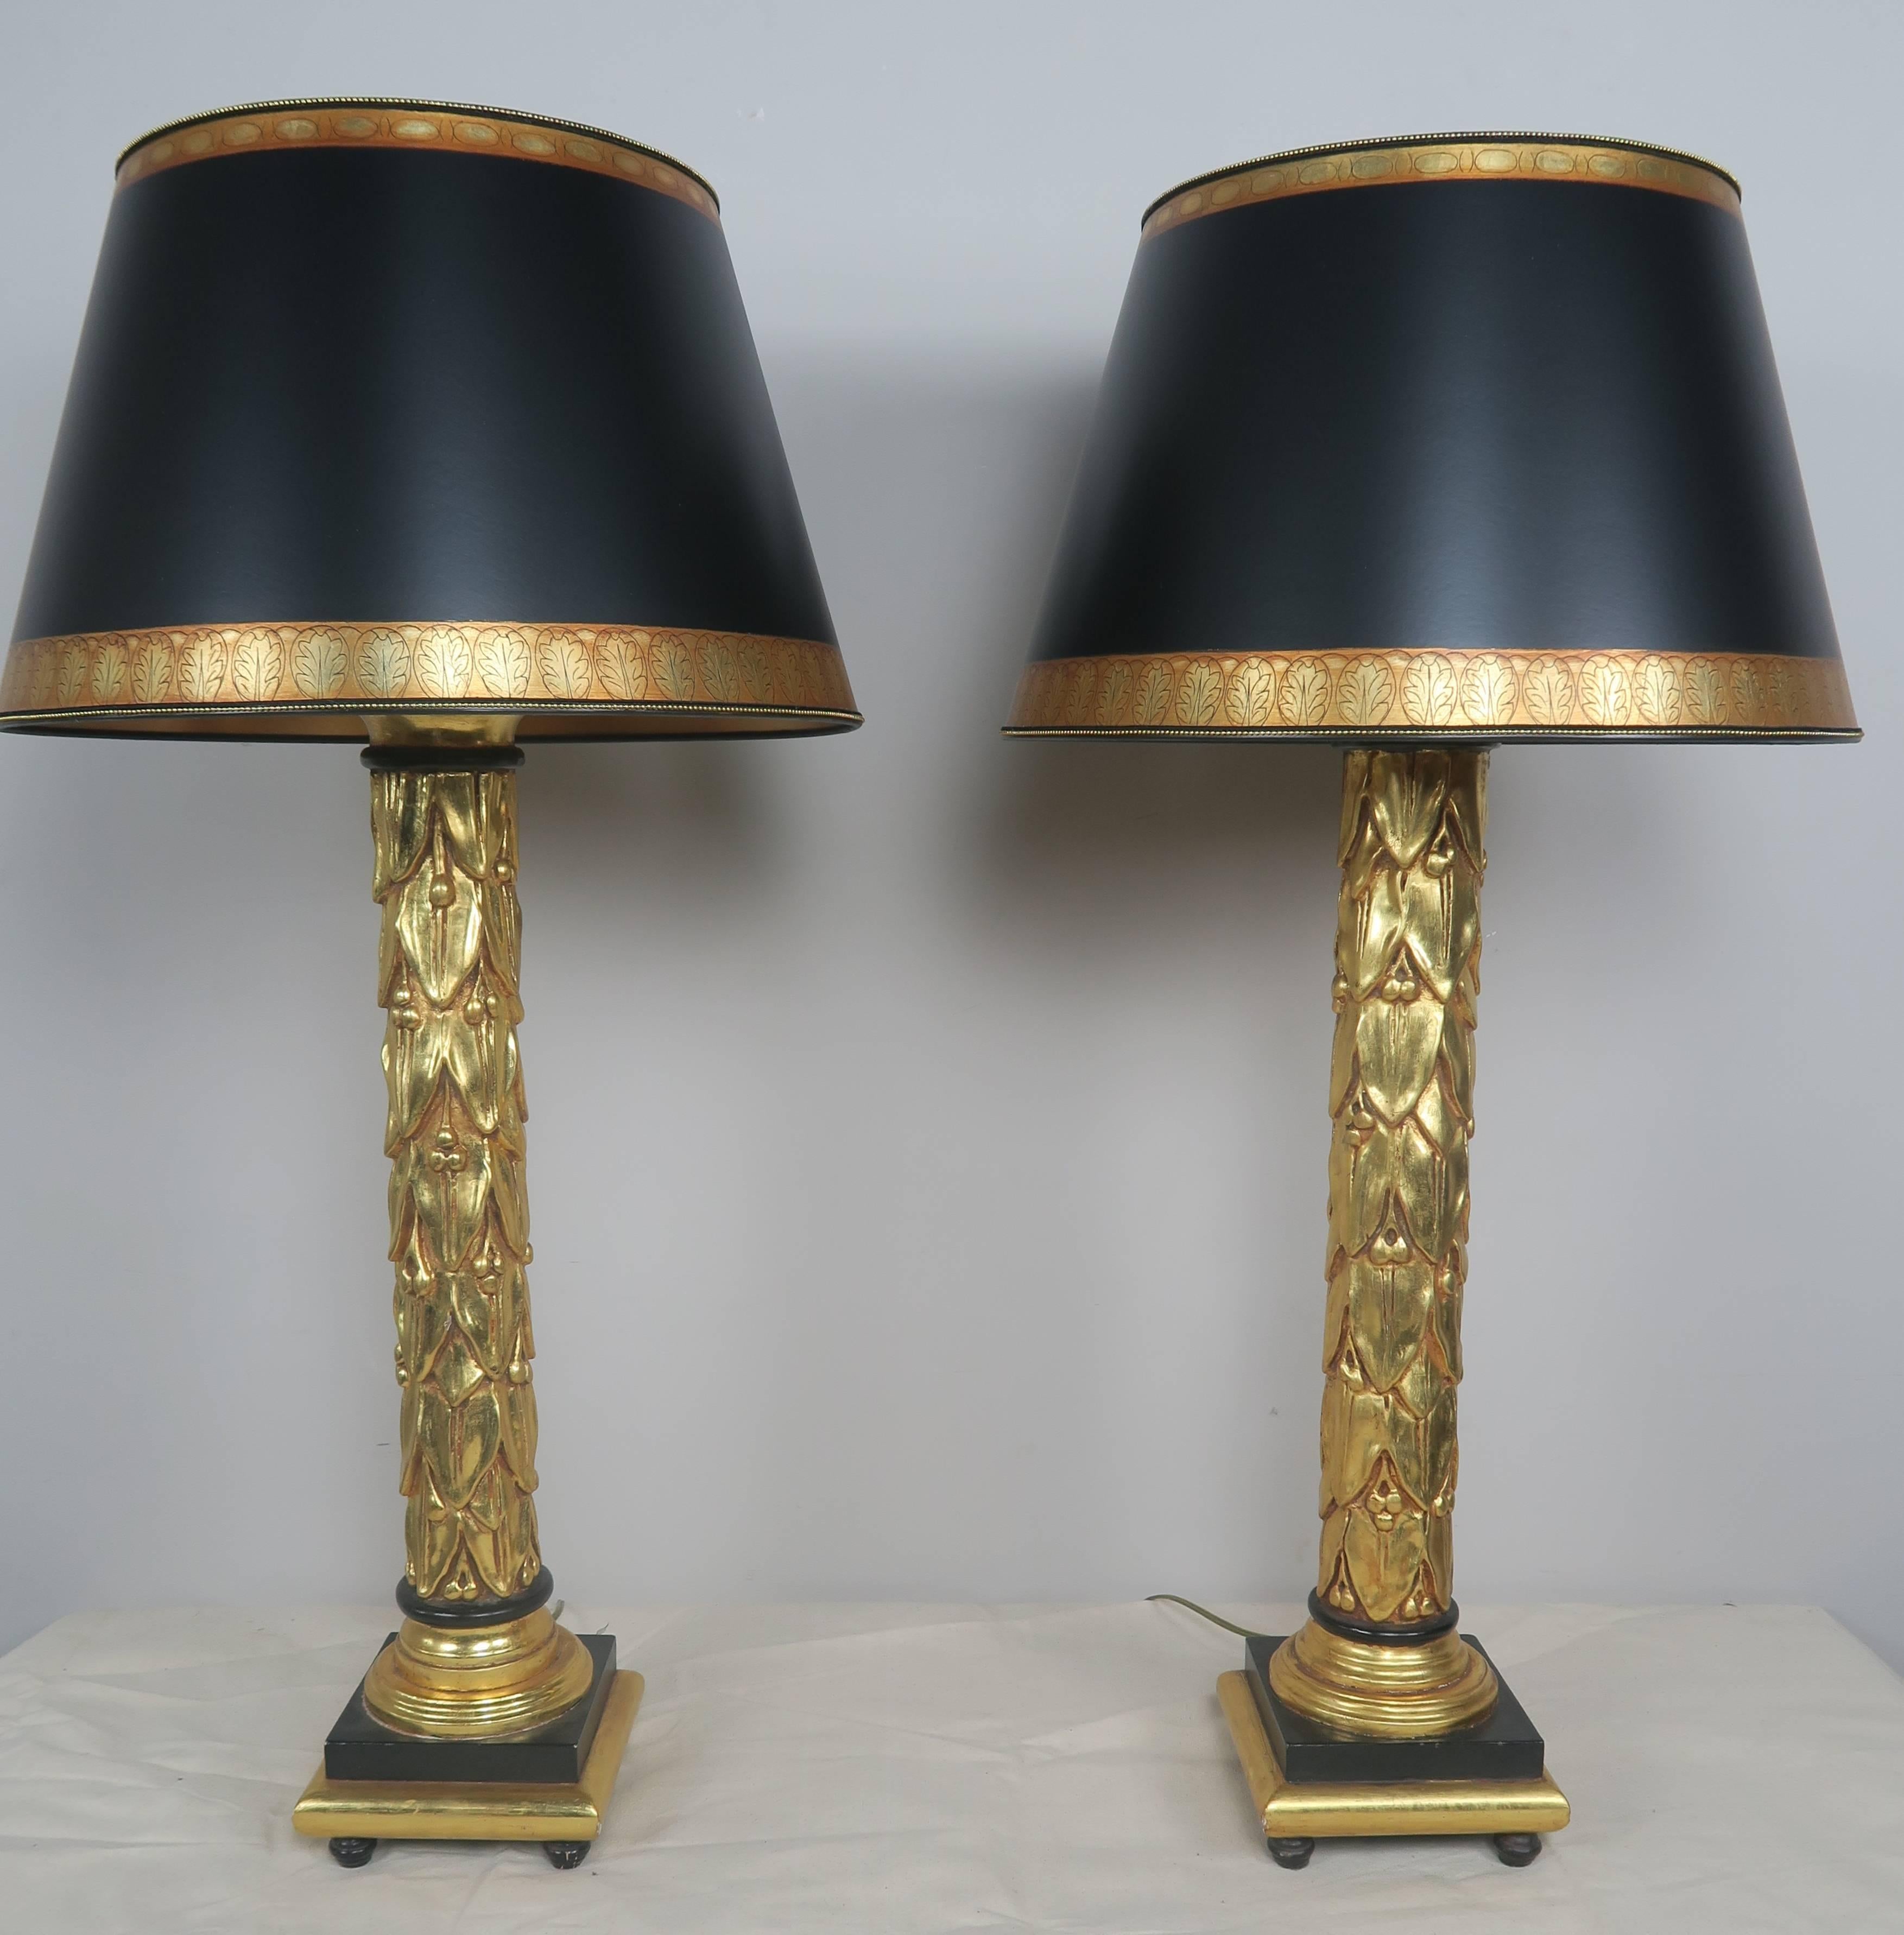 Neoclassical style 22-karat gold leaf and black painted lamps with hand-painted black and gold parchment shades. These lamps were originally made by Traditional Imports in the mid-late 20th century. The lamps have been newly rewired and are in